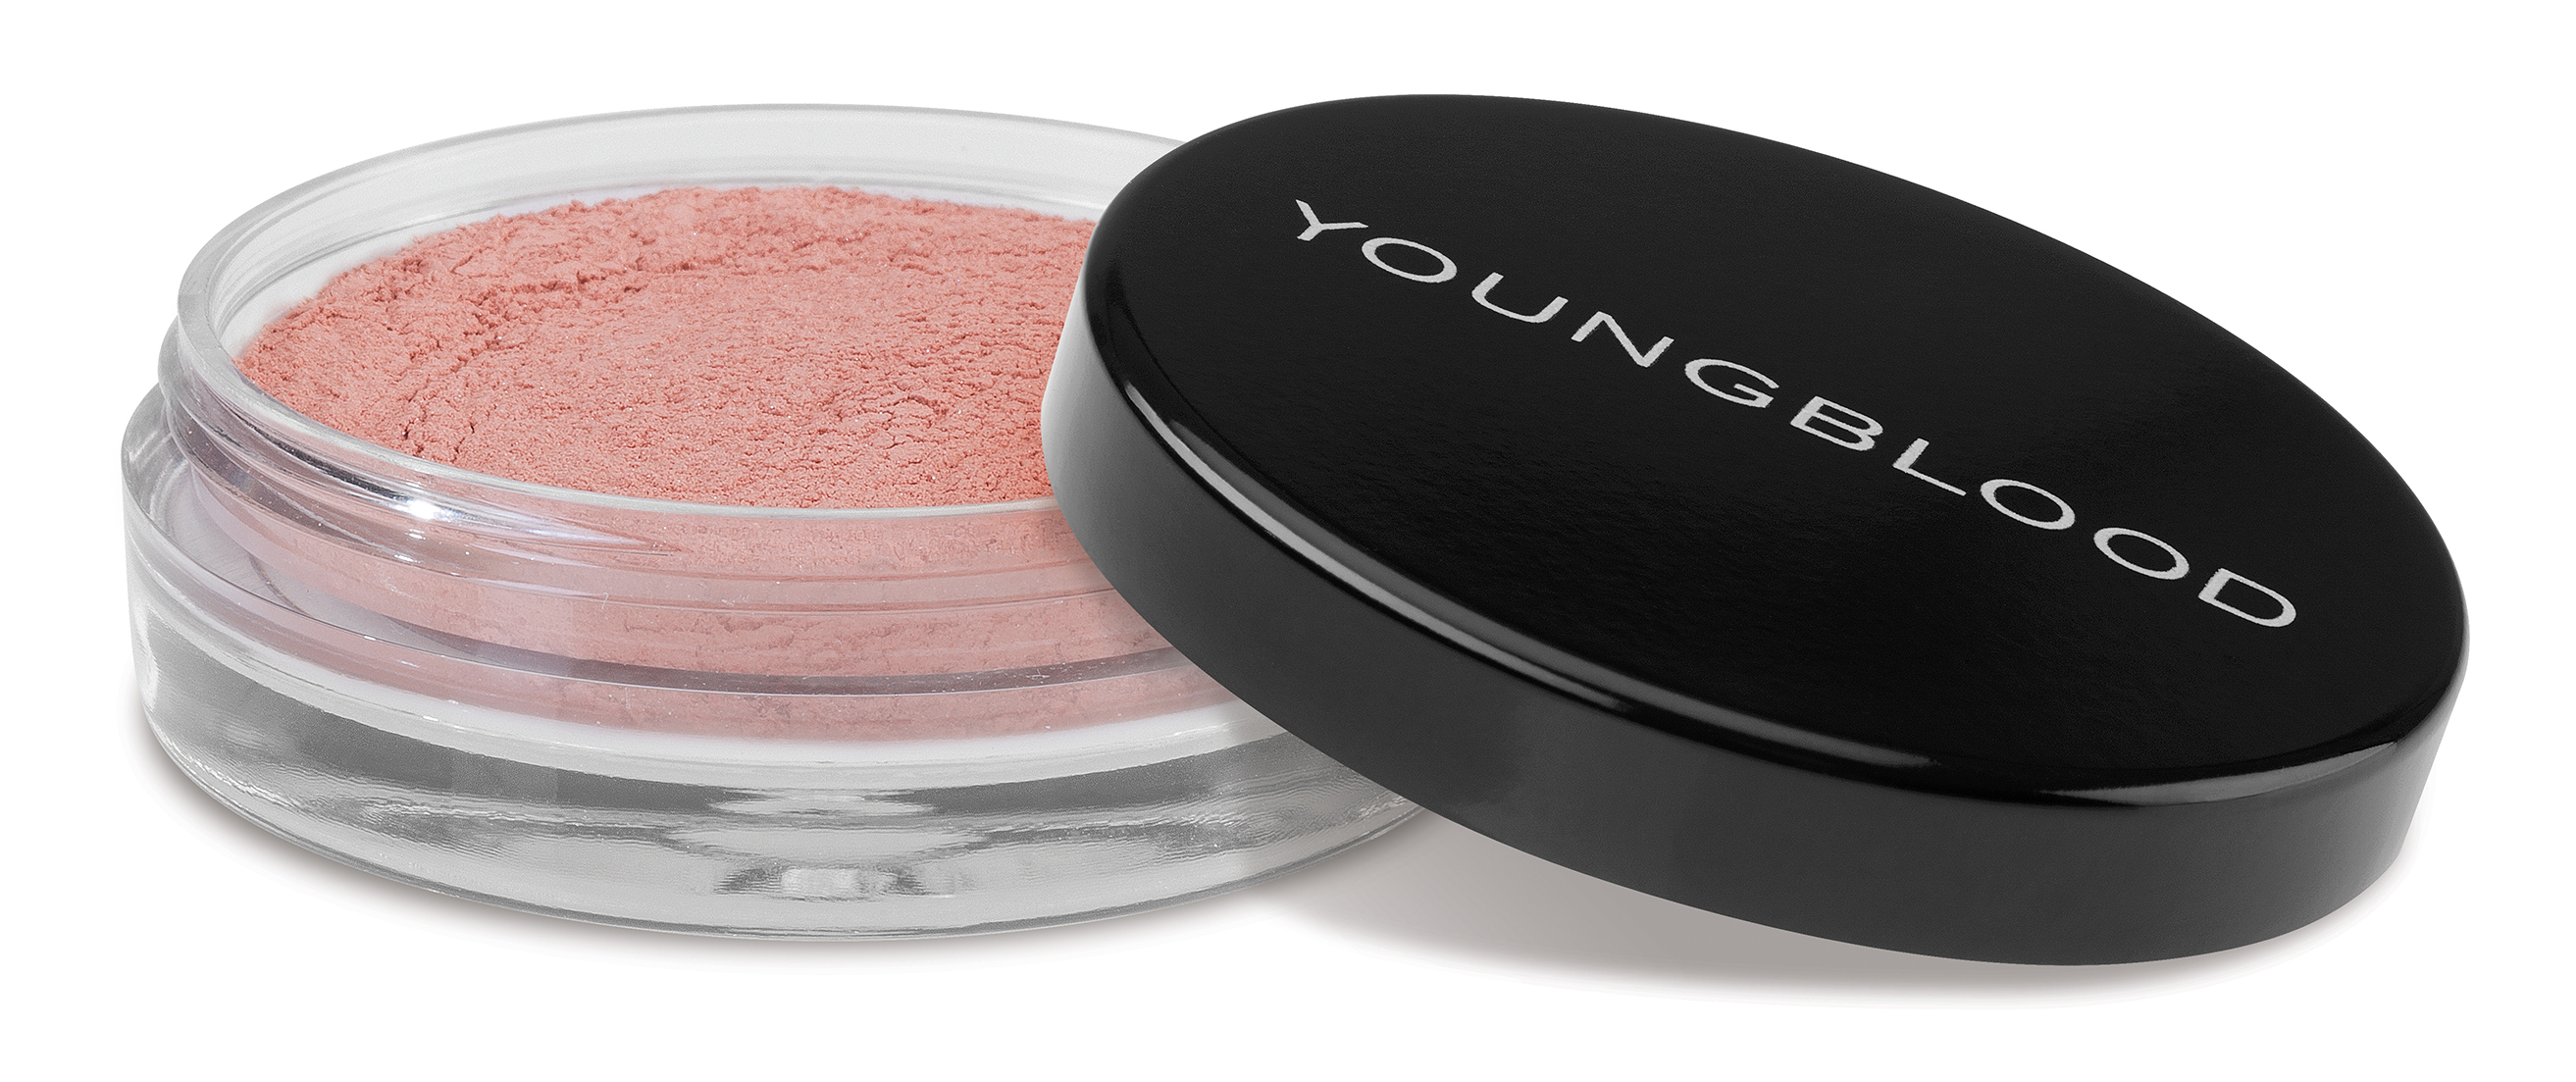 Youngblood Crushed Mineral Blush 01 Dusty Pink